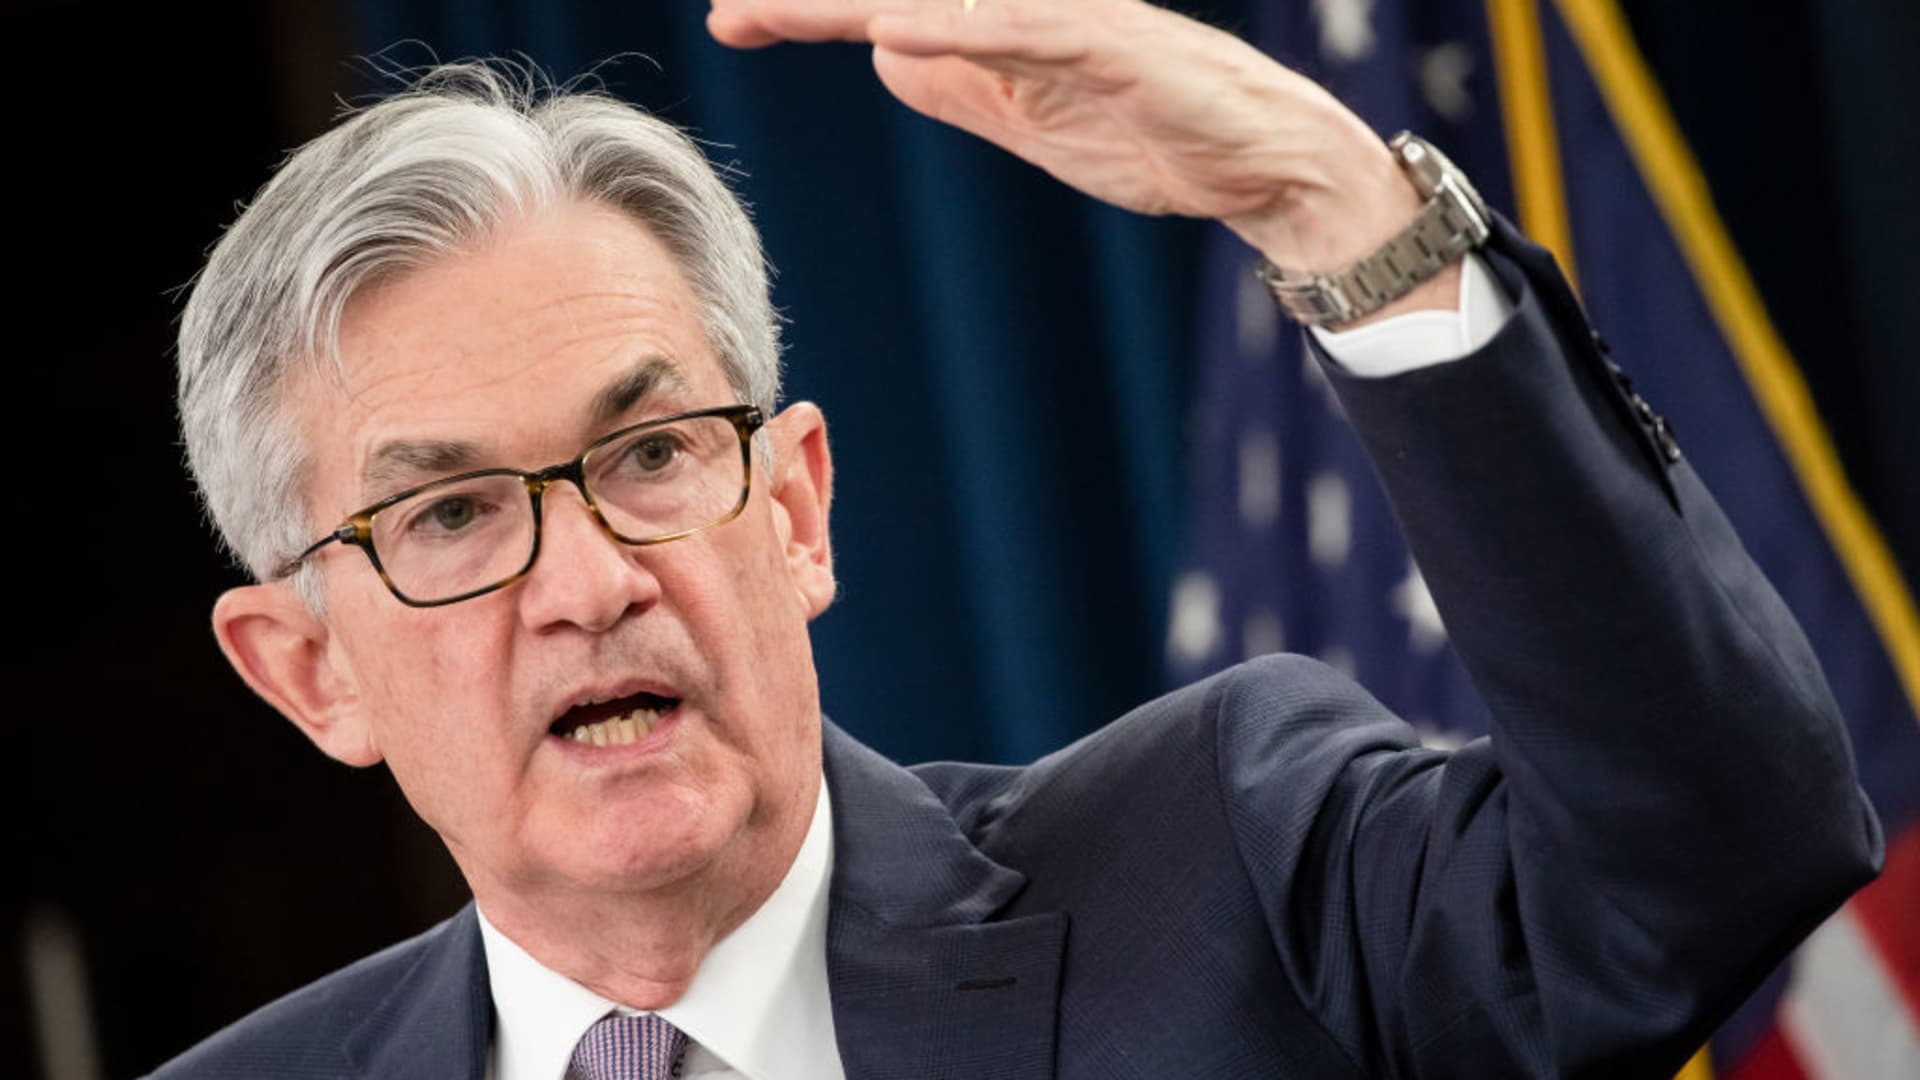 Federal Reserve Board Chairman Jerome Powell speaks during a news conference after a Federal Open Market Committee meeting on January 29, 2020 in Washington, DC.